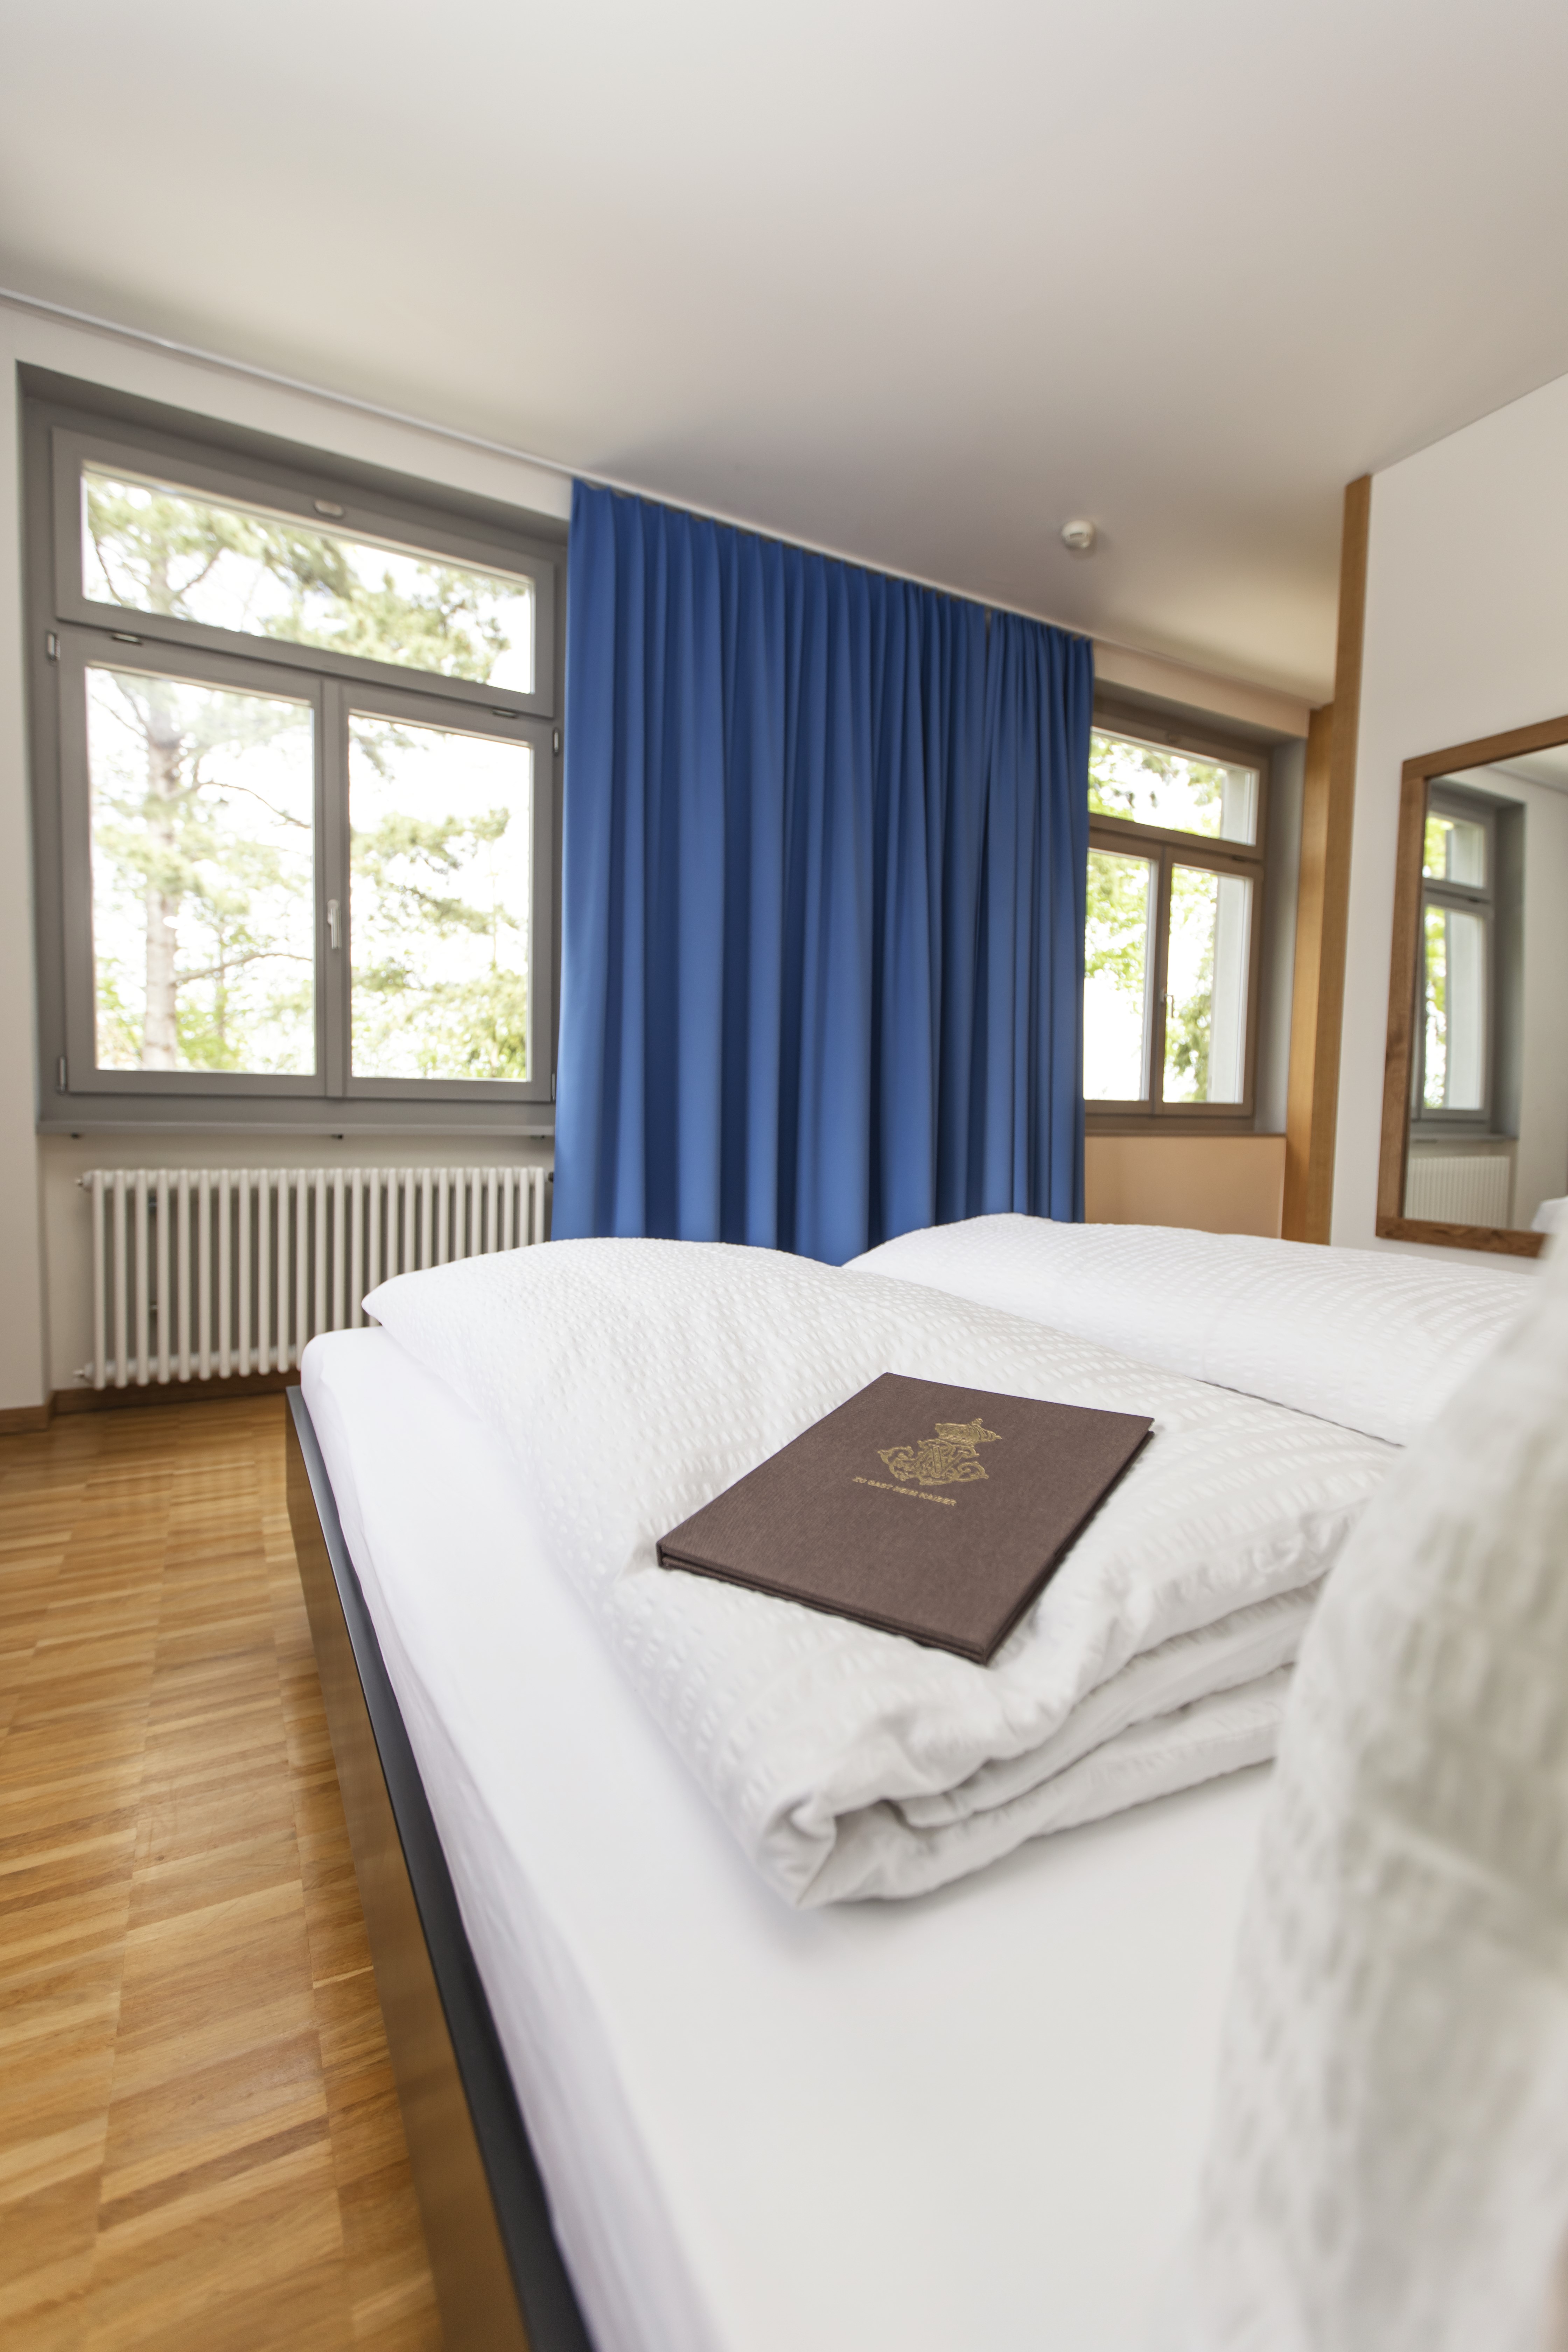 Stay overnight at the Hotel Arenenberg